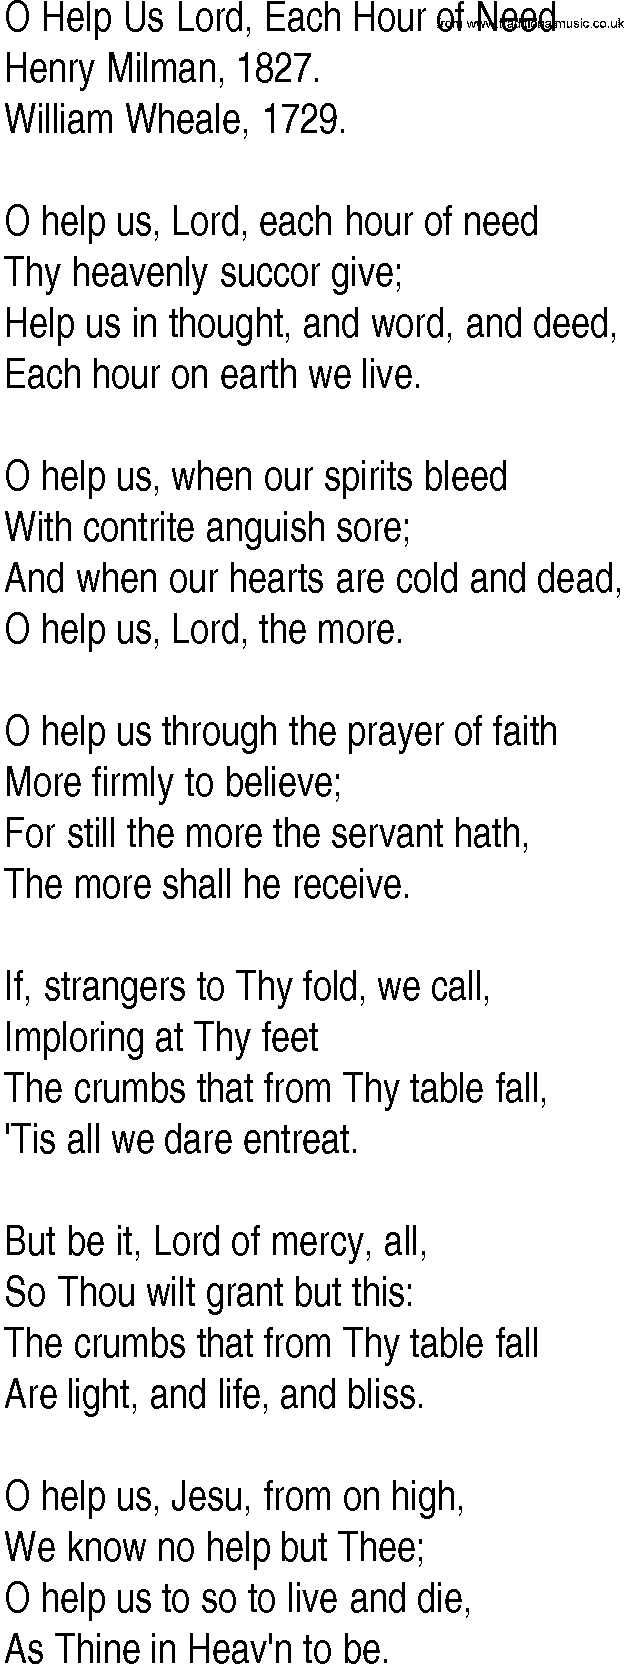 Hymn and Gospel Song: O Help Us Lord, Each Hour of Need by Henry Milman lyrics